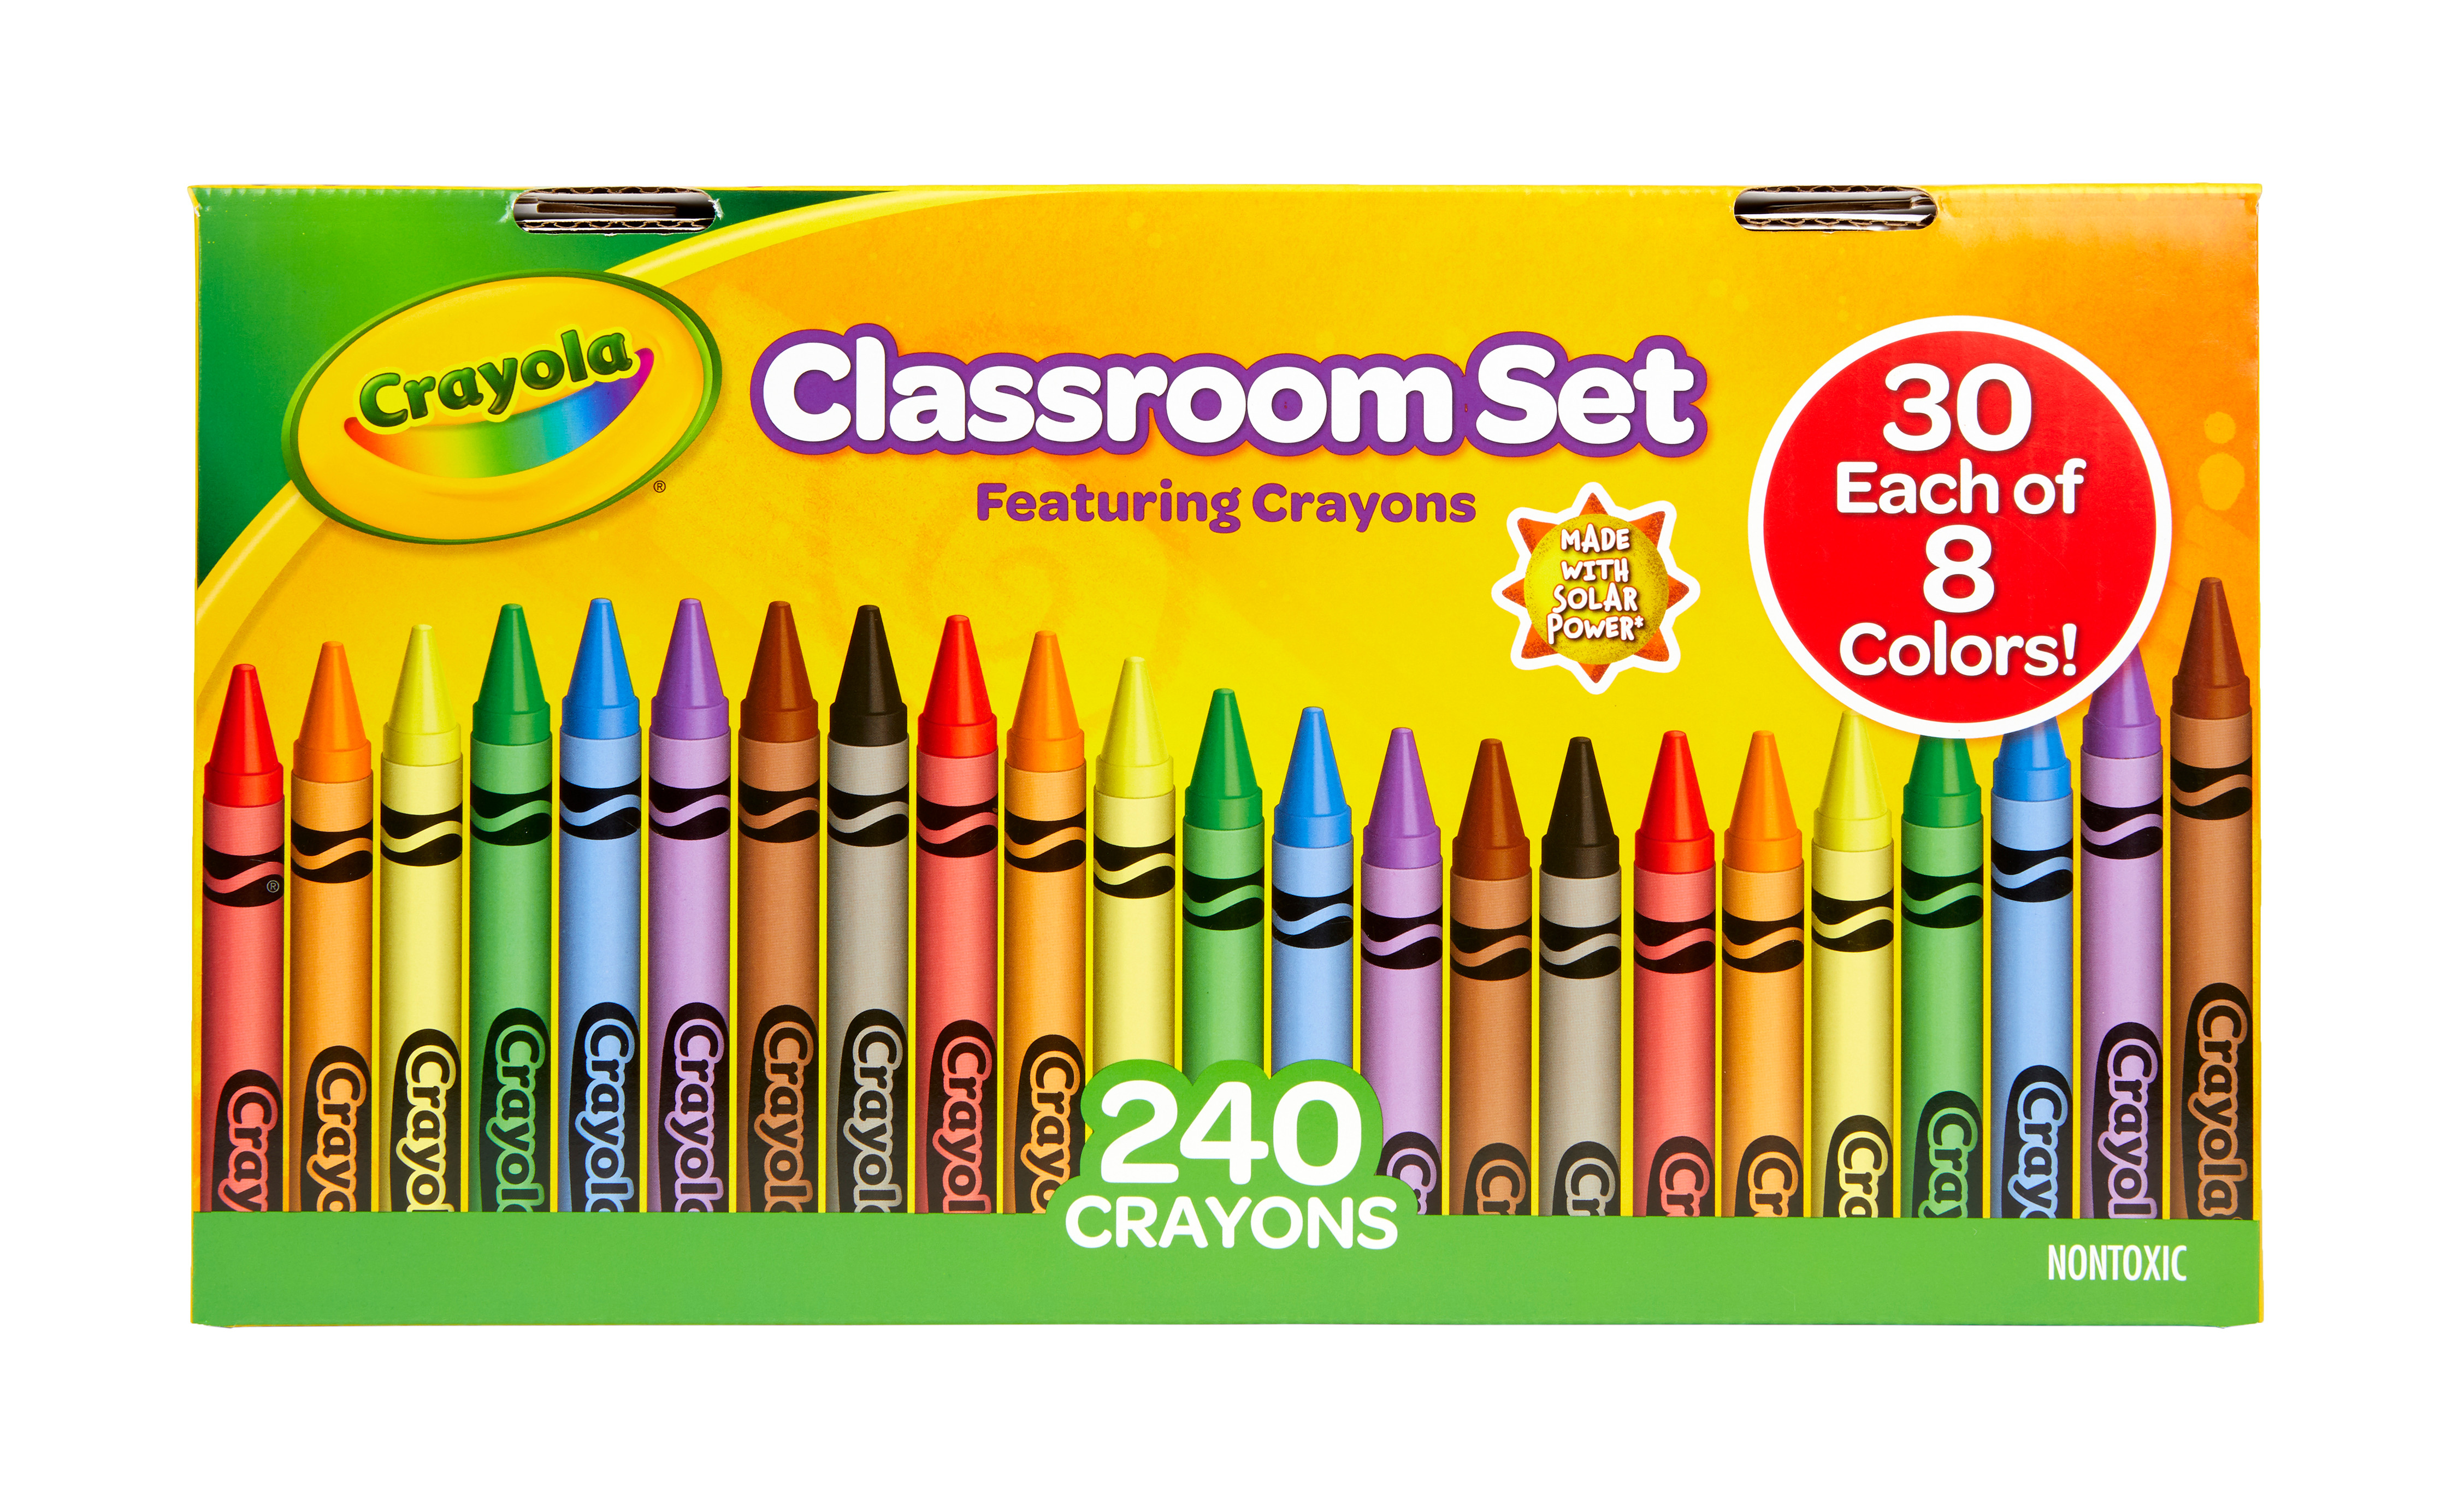 Crayola Classroom Set Crayons, 240 Ct, Teacher Supplies & Gifts, Classroom Supplies, Assorted Colors - image 1 of 9